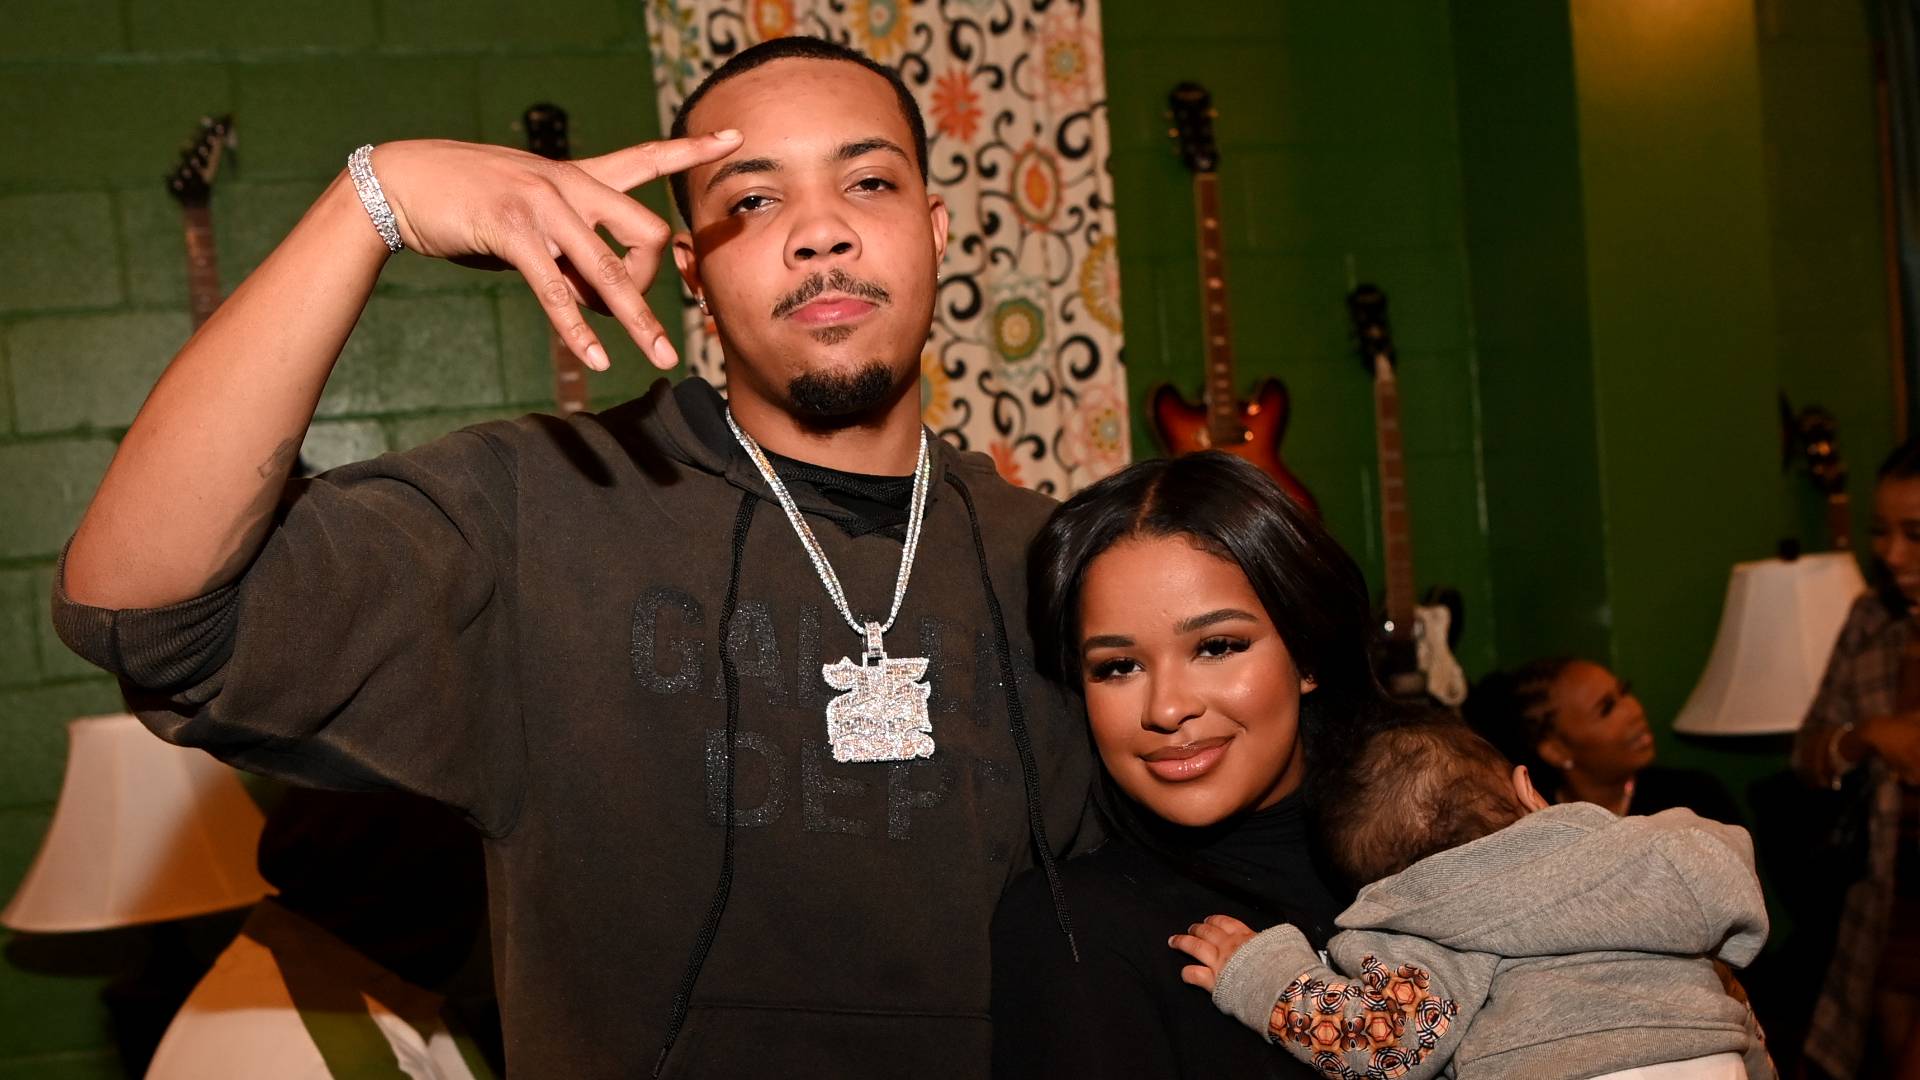 G Herbo and Taina Williams backstage during G Herbo In Concert at Tabernacle on November 27, 2021 in Atlanta, Georgia.